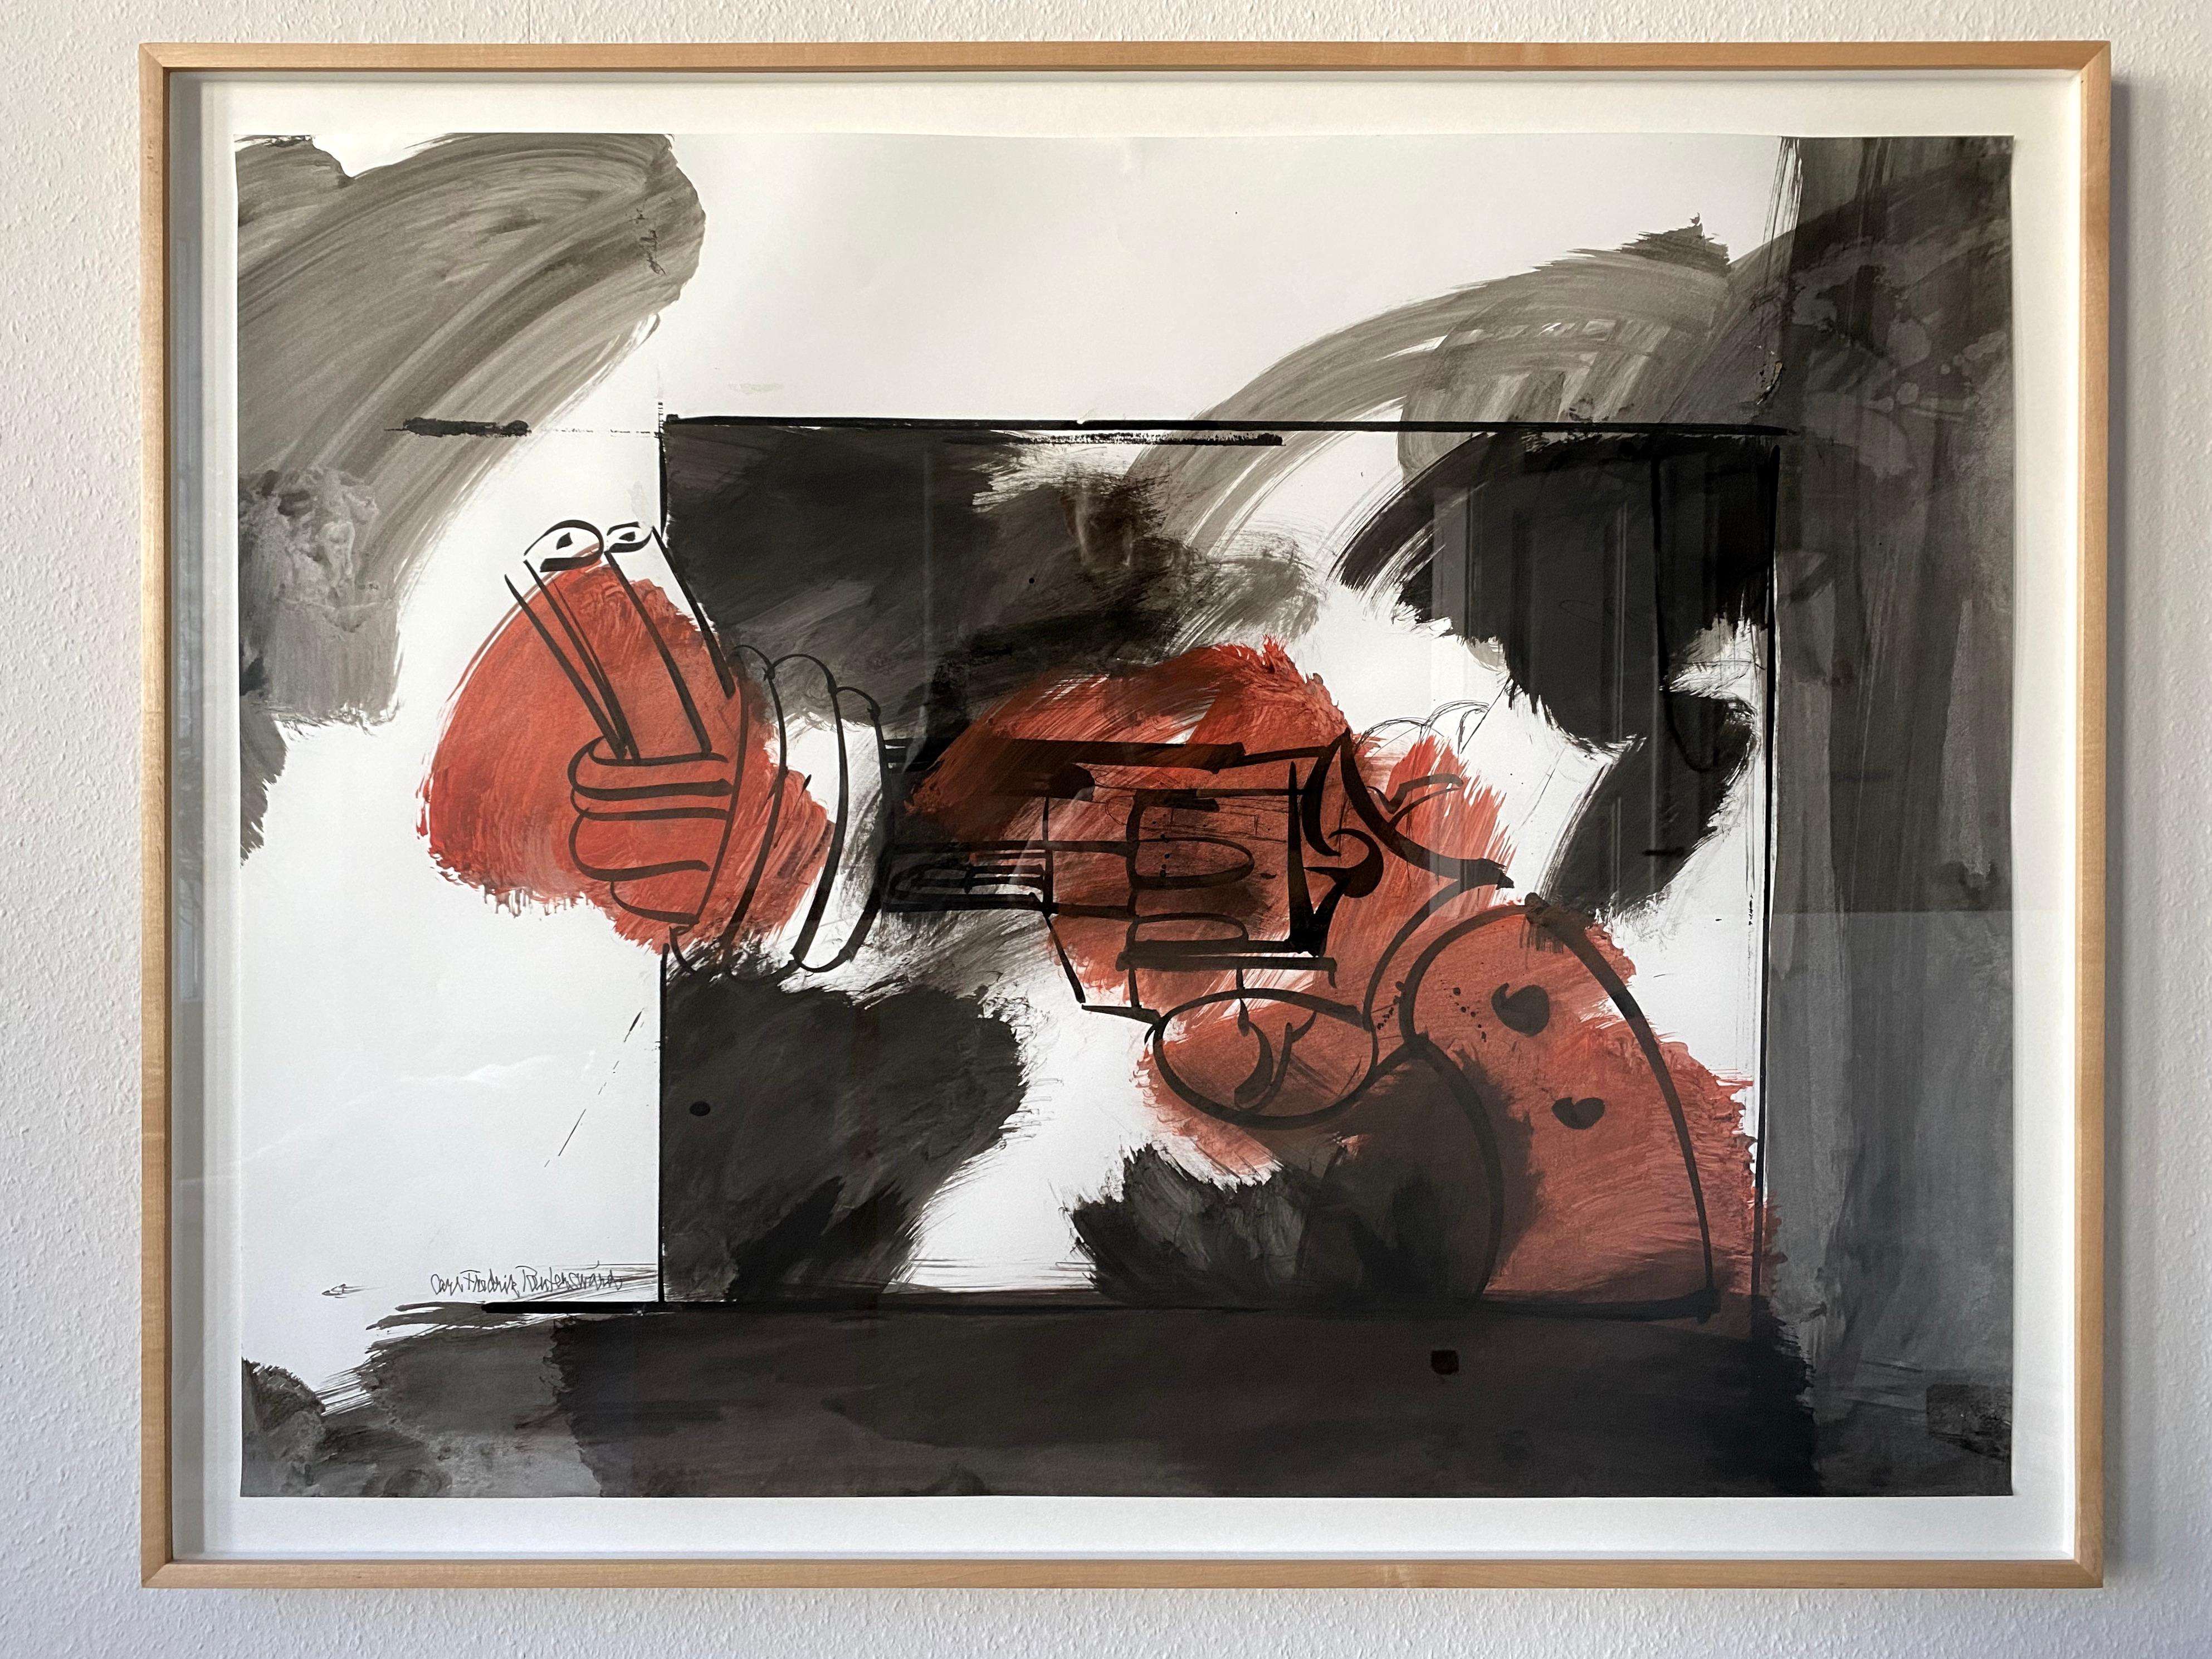 Carl Fredrik Reuterswärd
untitled (Knotted-Gun) 1980s
Gouache on paper
70 x 90 cm

Carl Fredrik Reuterswärd (1943-1916) studied art in Paris with the painter Fernand Léger and at Stockholm’s Royal Institute of Art. He is considered one of Sweden's